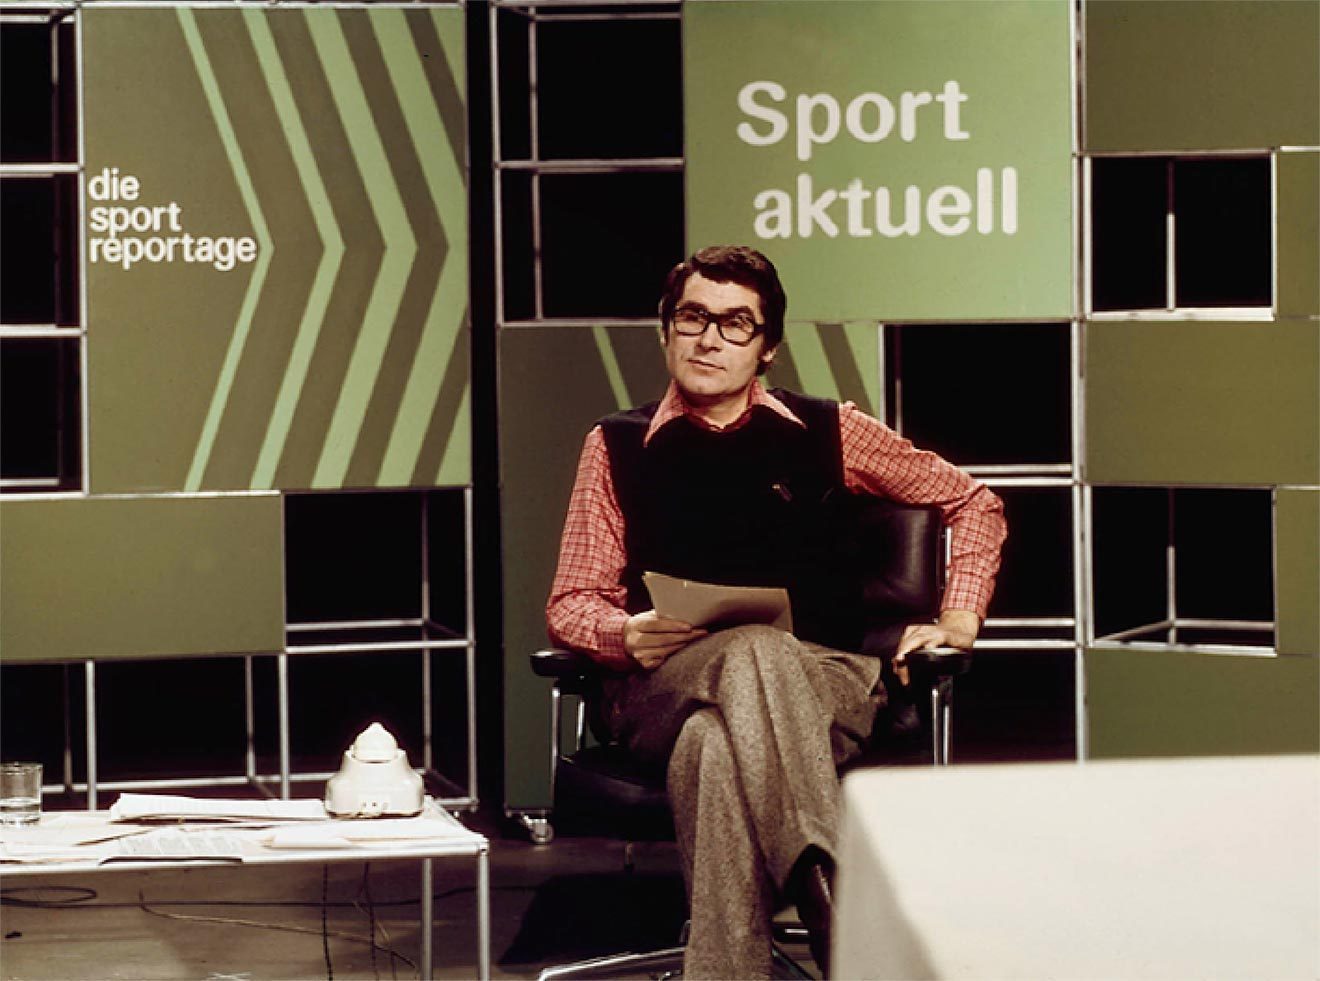 In 1972 Otl Aicher and his team designed four weights of a round Univers for the Zweites Deutsches Fernsehen (Second German Television). The new round look defined all type on screen including the new ZDF logo as well as the logos of many new programs. (With kind permission of Horst Schick, ZDF Marketing Division.)